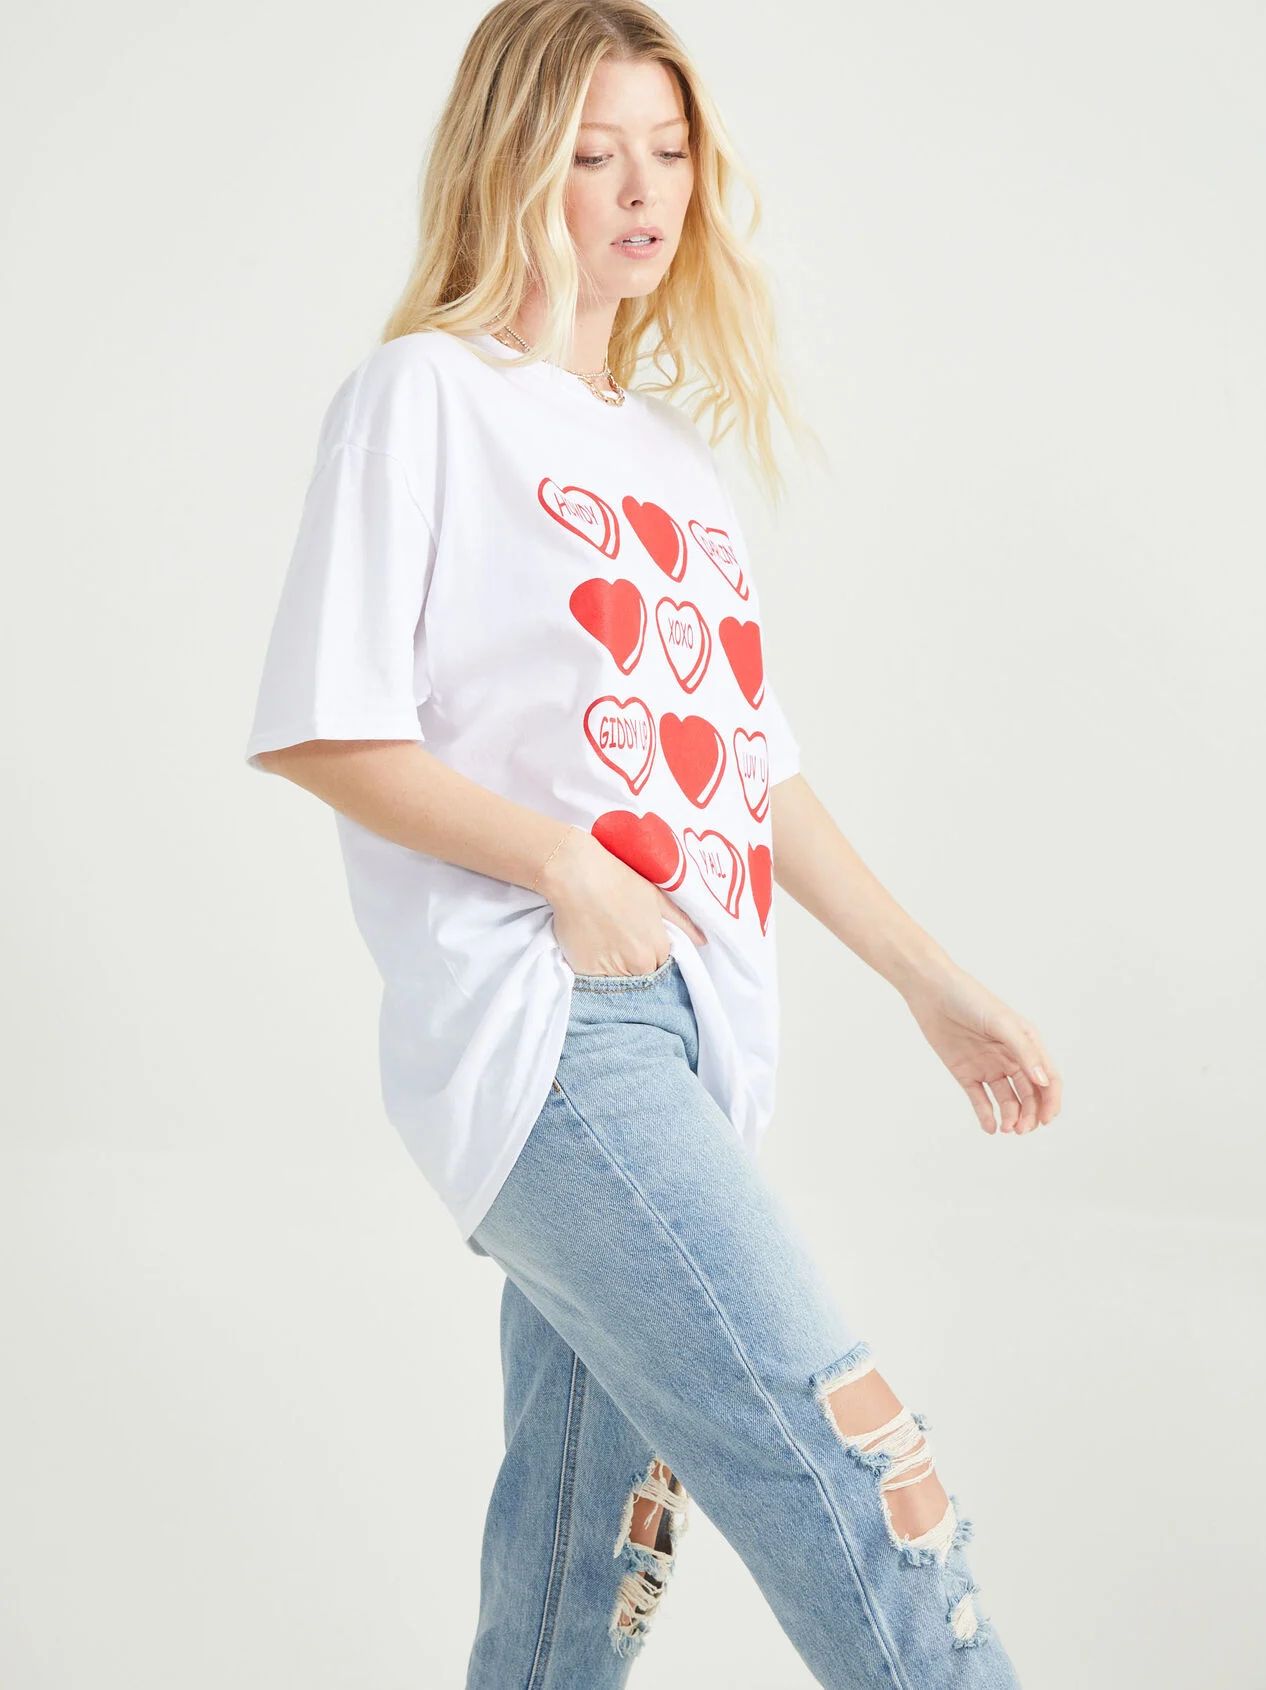 Candy Heart Tee | Altar'd State